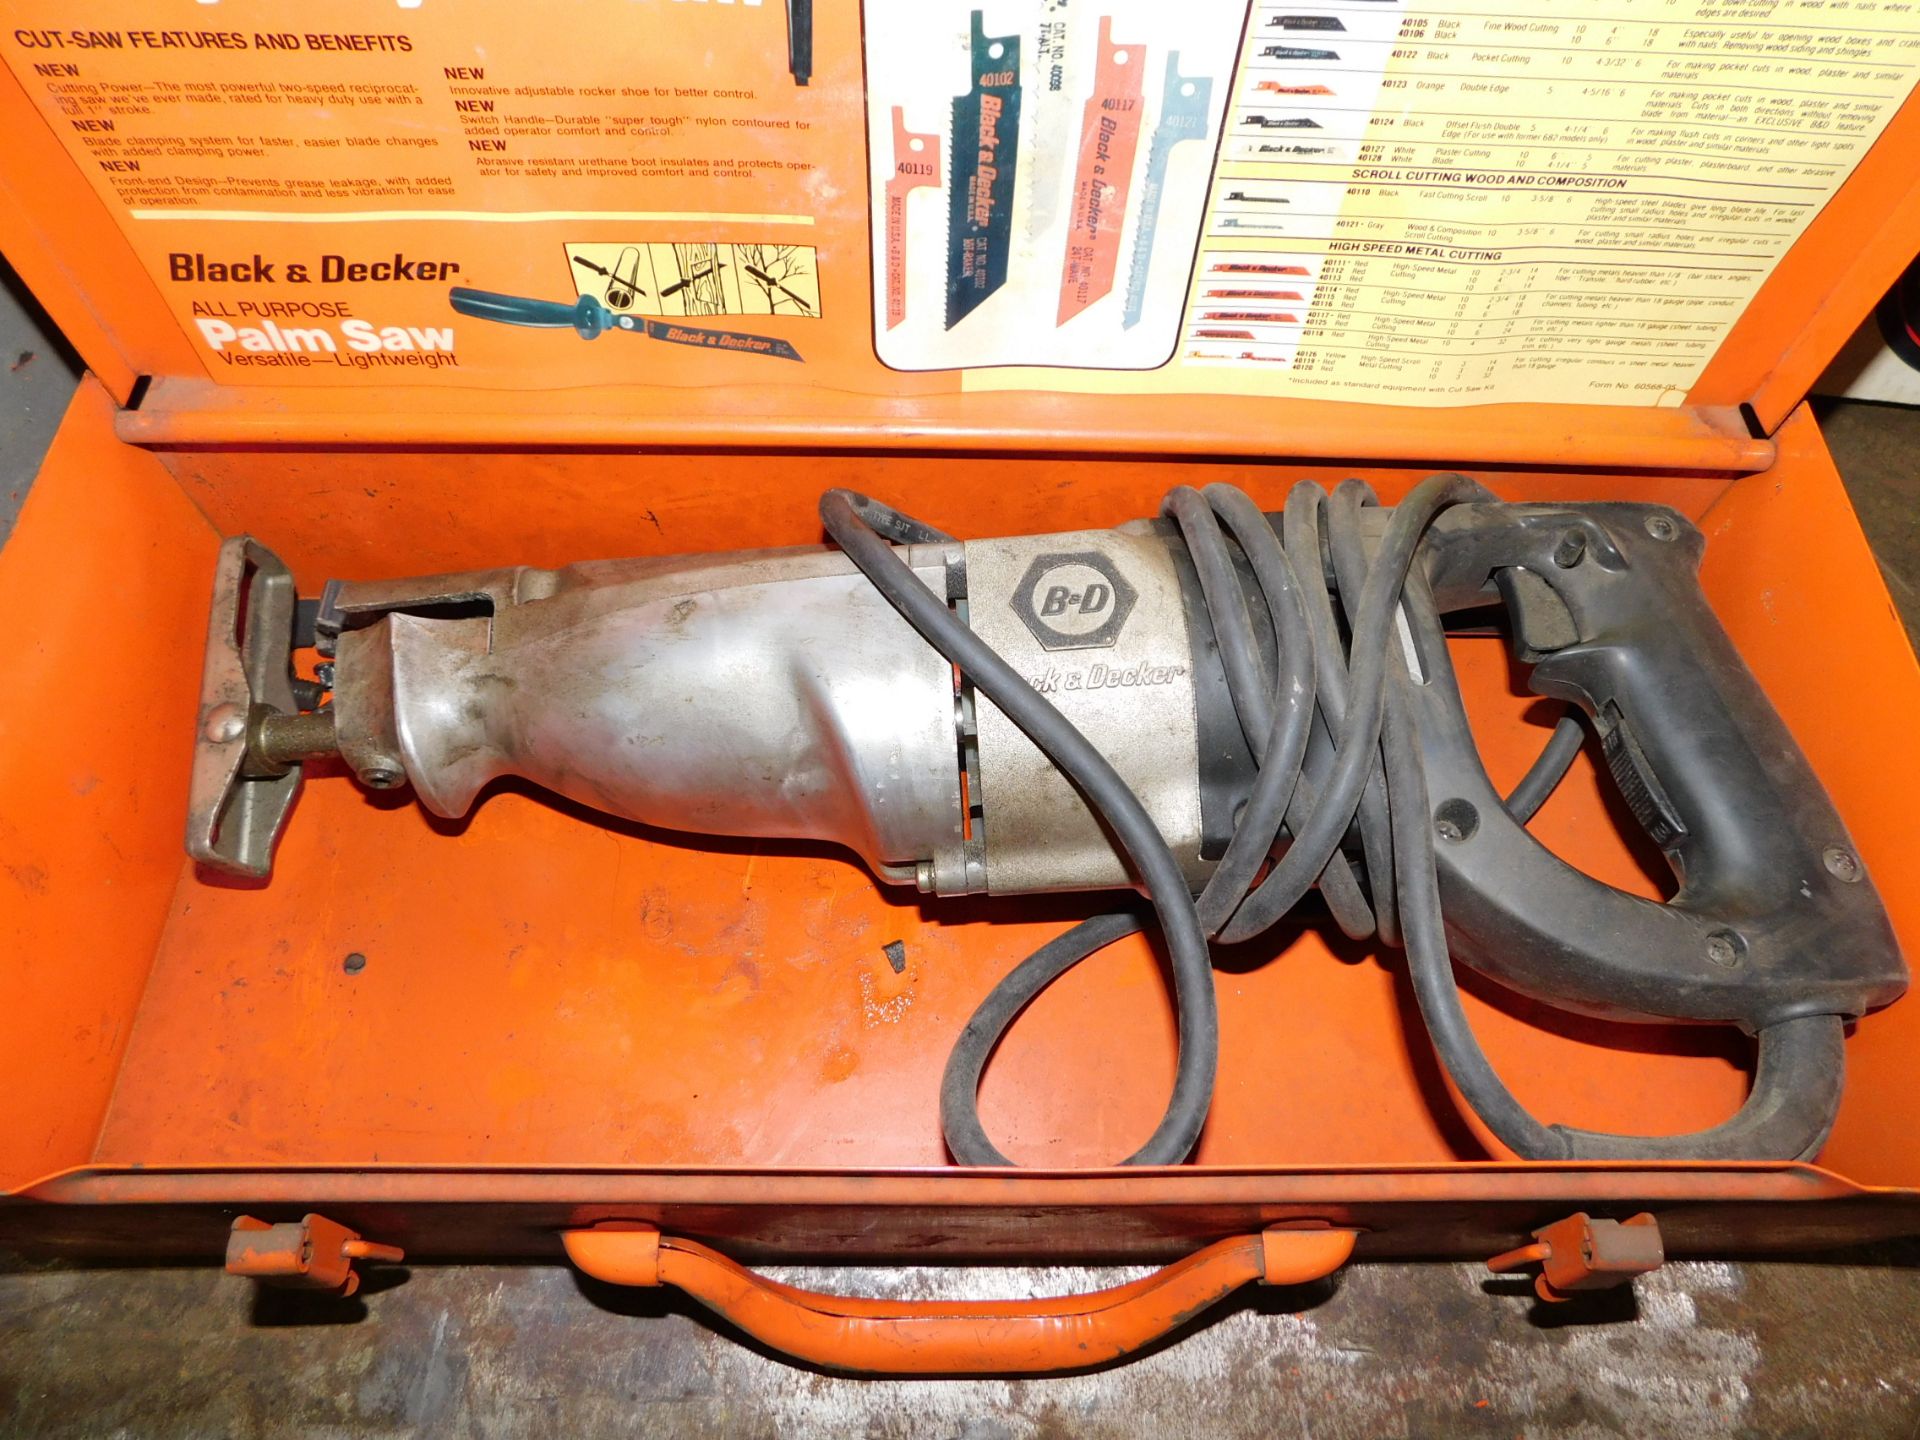 Black & Decker Reciprocating Saw with Case